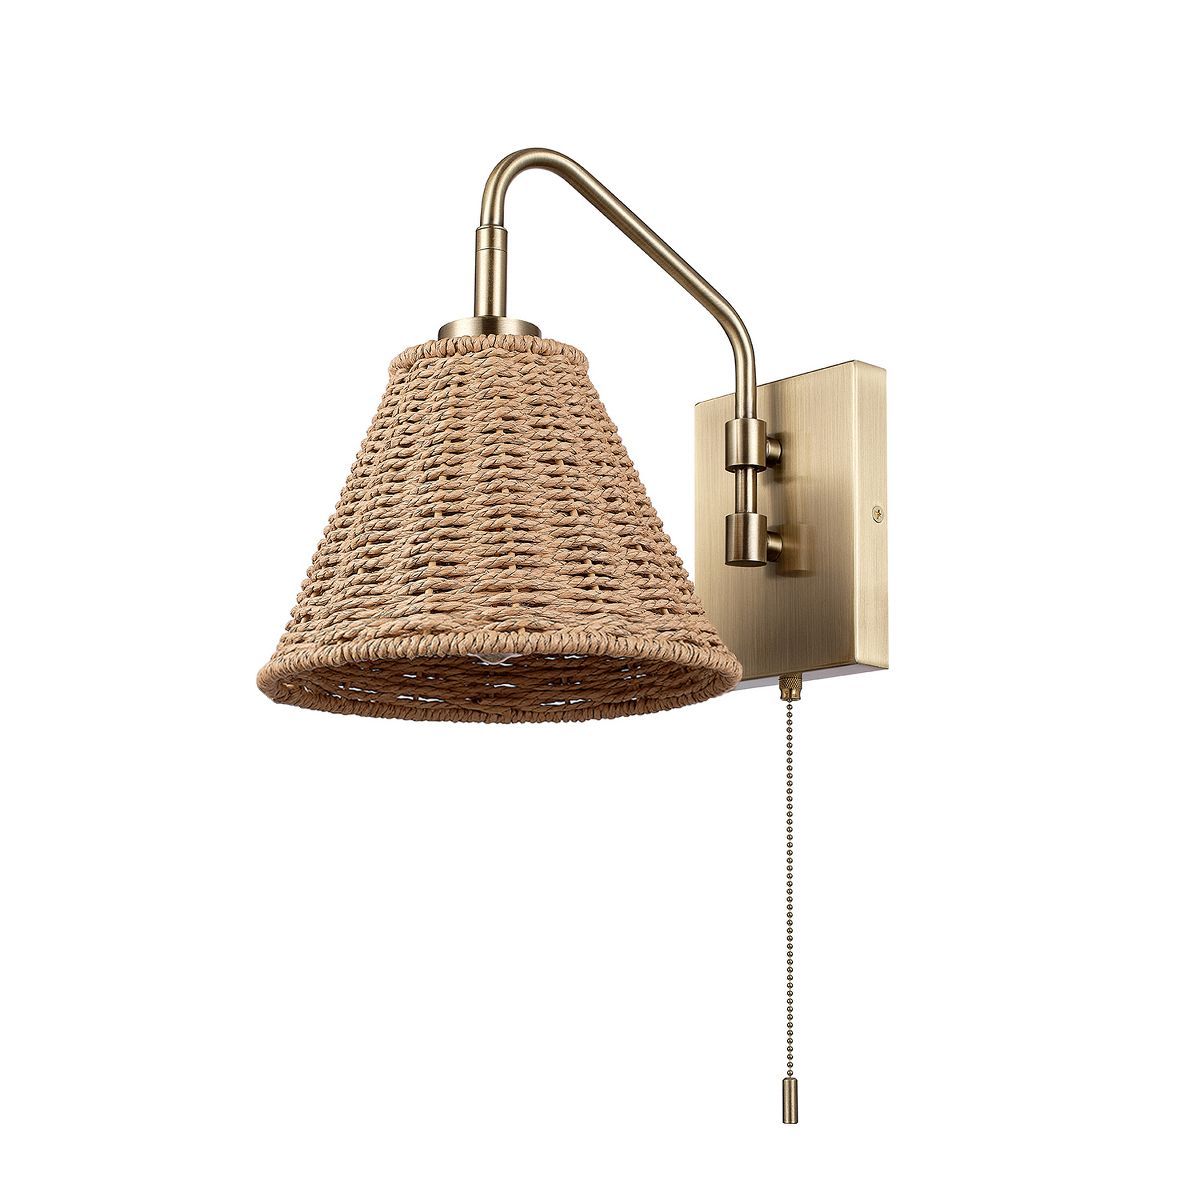 Globe Electric 1-Light Matte Brass Wall Sconce with Rattan Shade and On/Off Pull Chain Switch by ... | Target